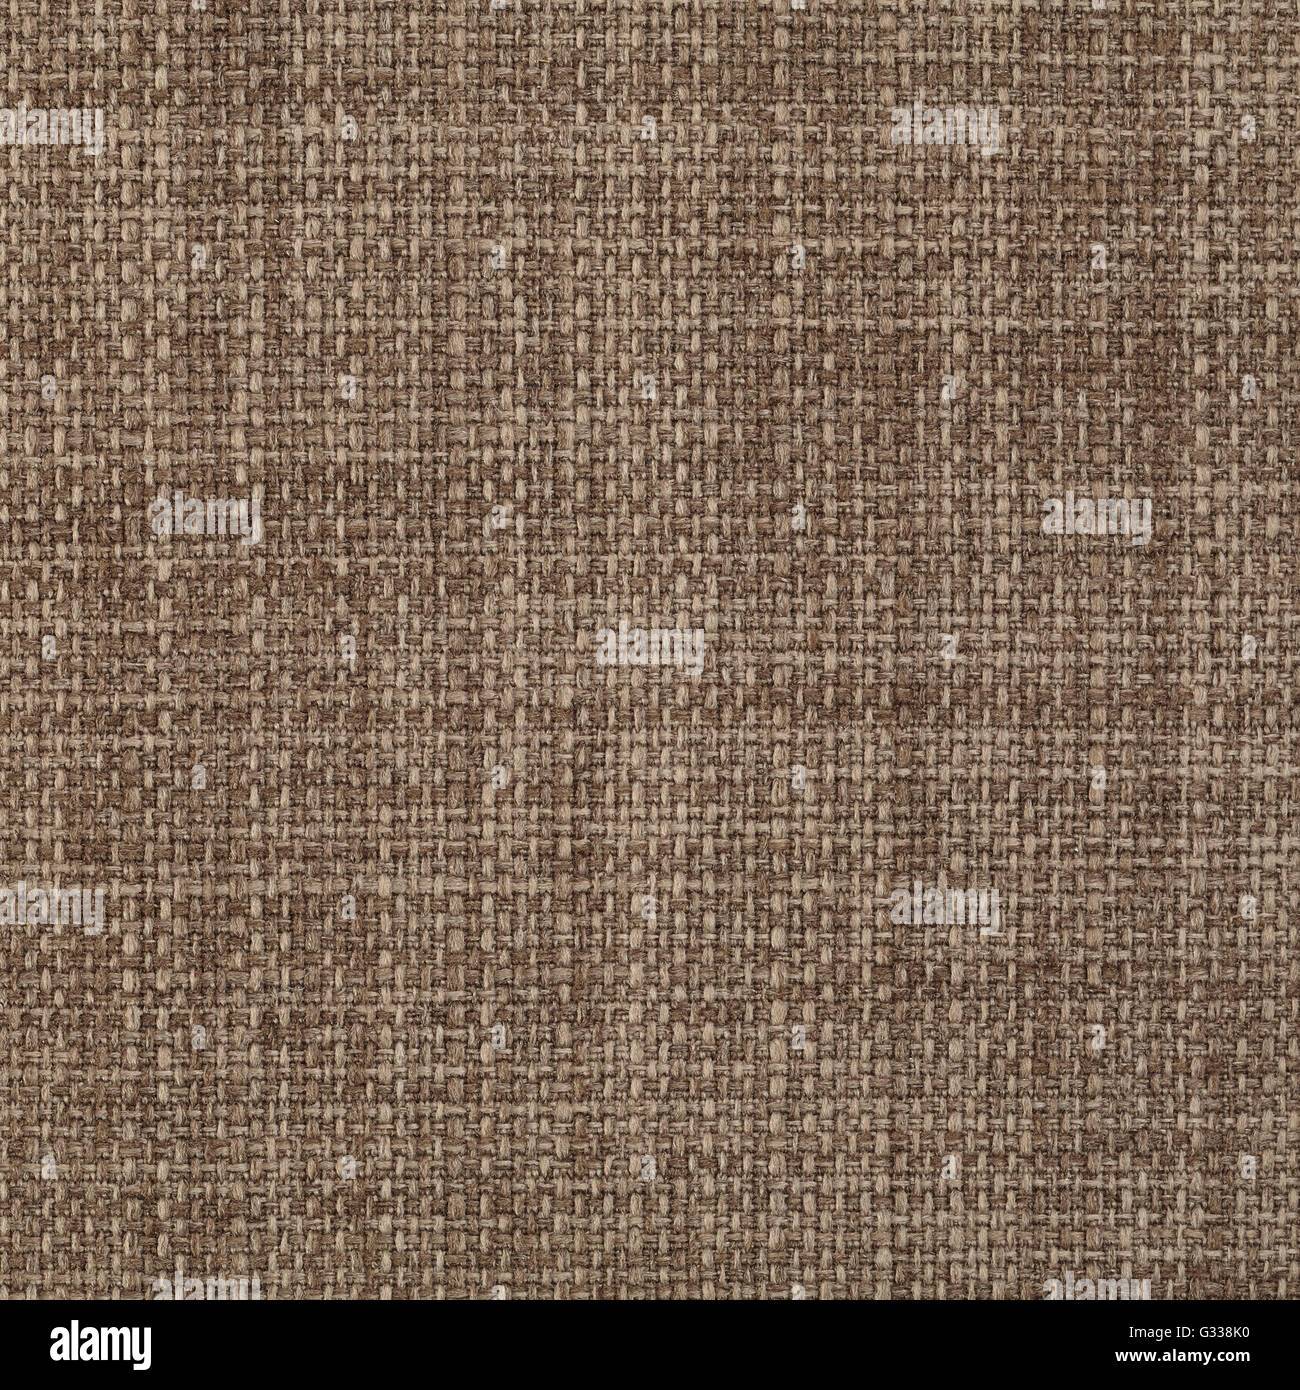 Brown fabric texture. Close up, top view. Stock Photo